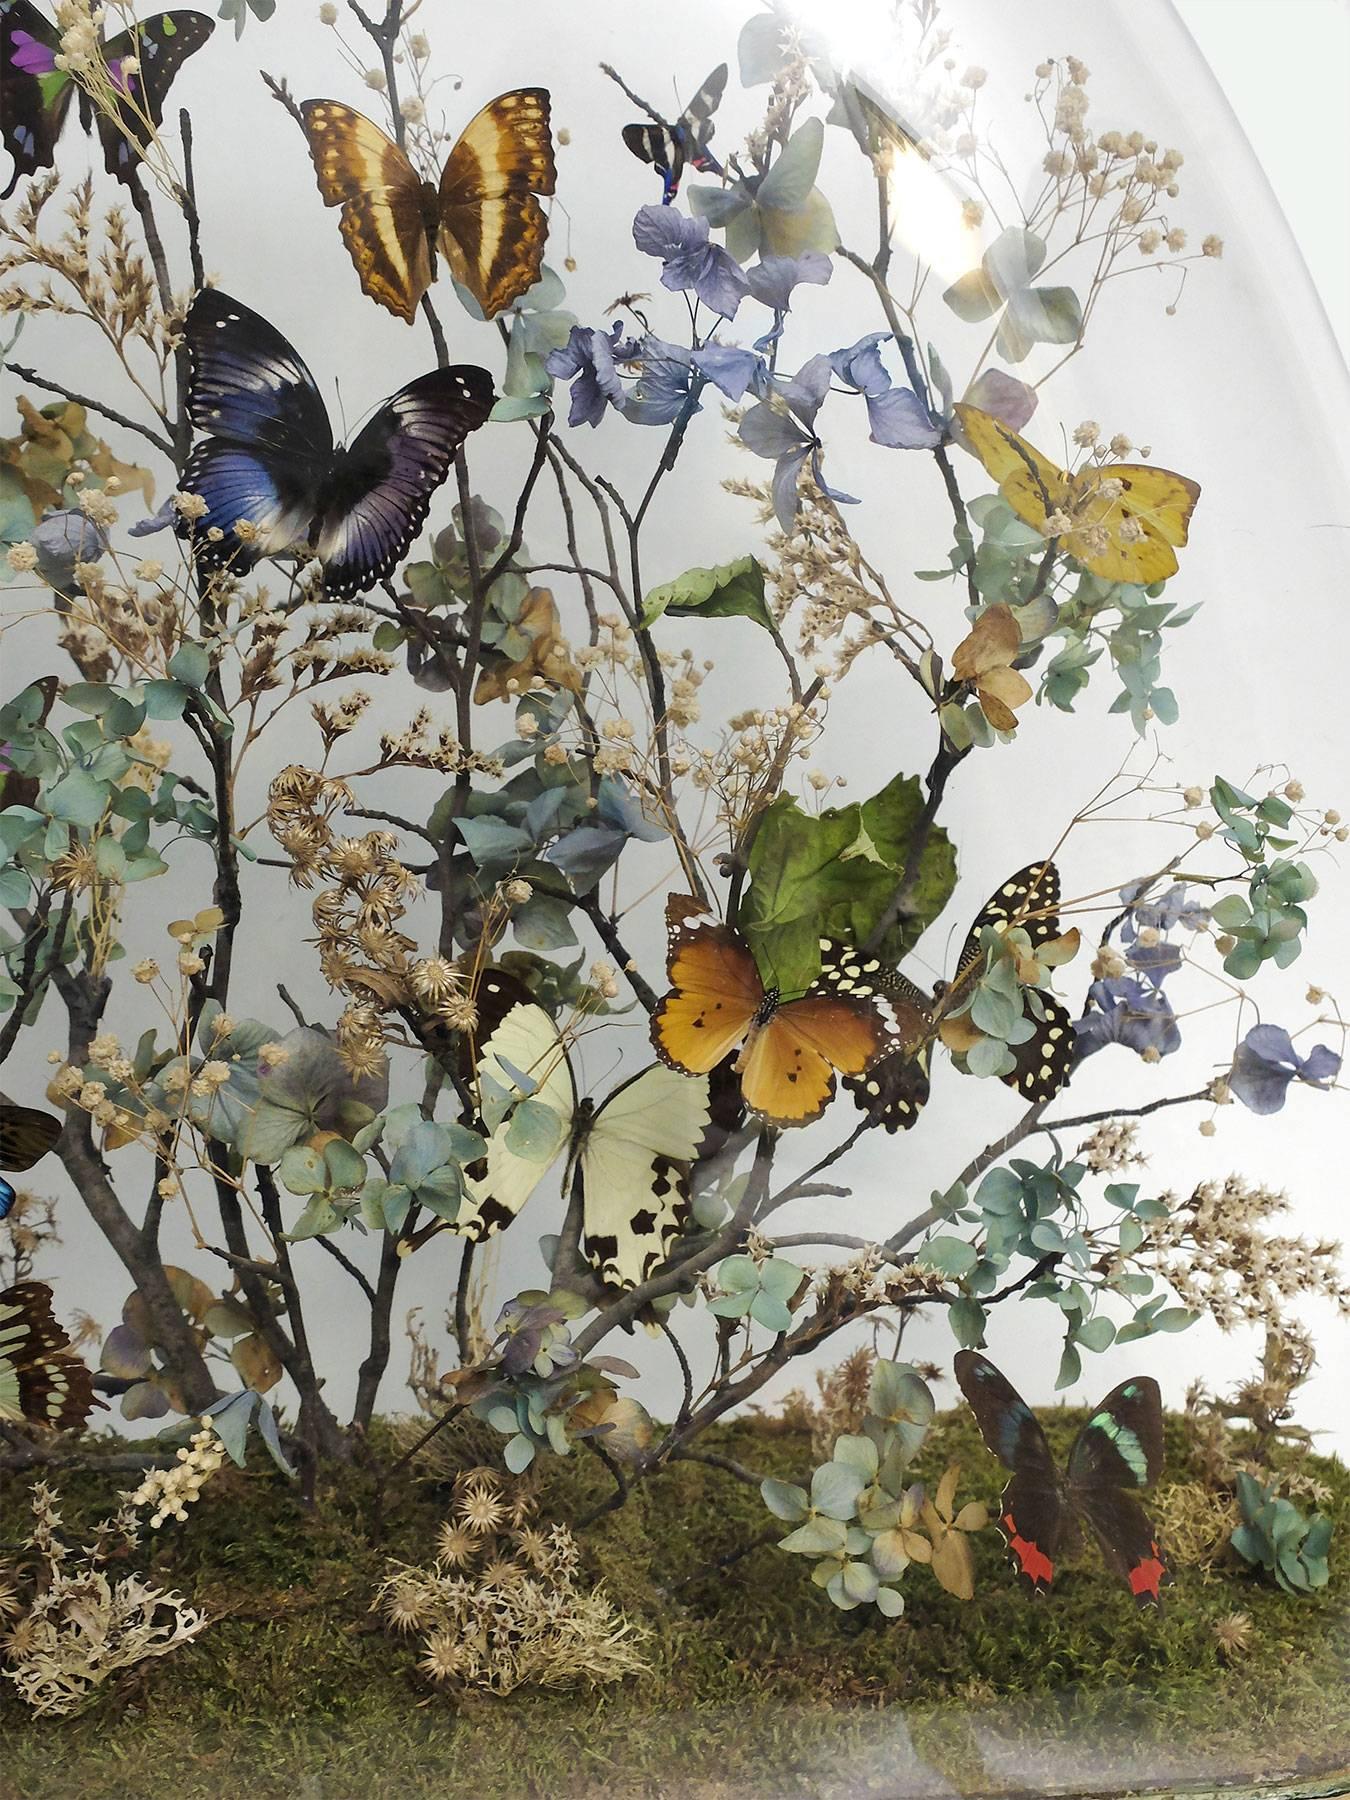 A splendid and unique diorama with natural Wunderkammer specimens of butterflies leaned over flowering tree branches, willing over moss. The specimens assembled in diorama are mounted inside a glass dome, over a white painted wooden base. Italy,